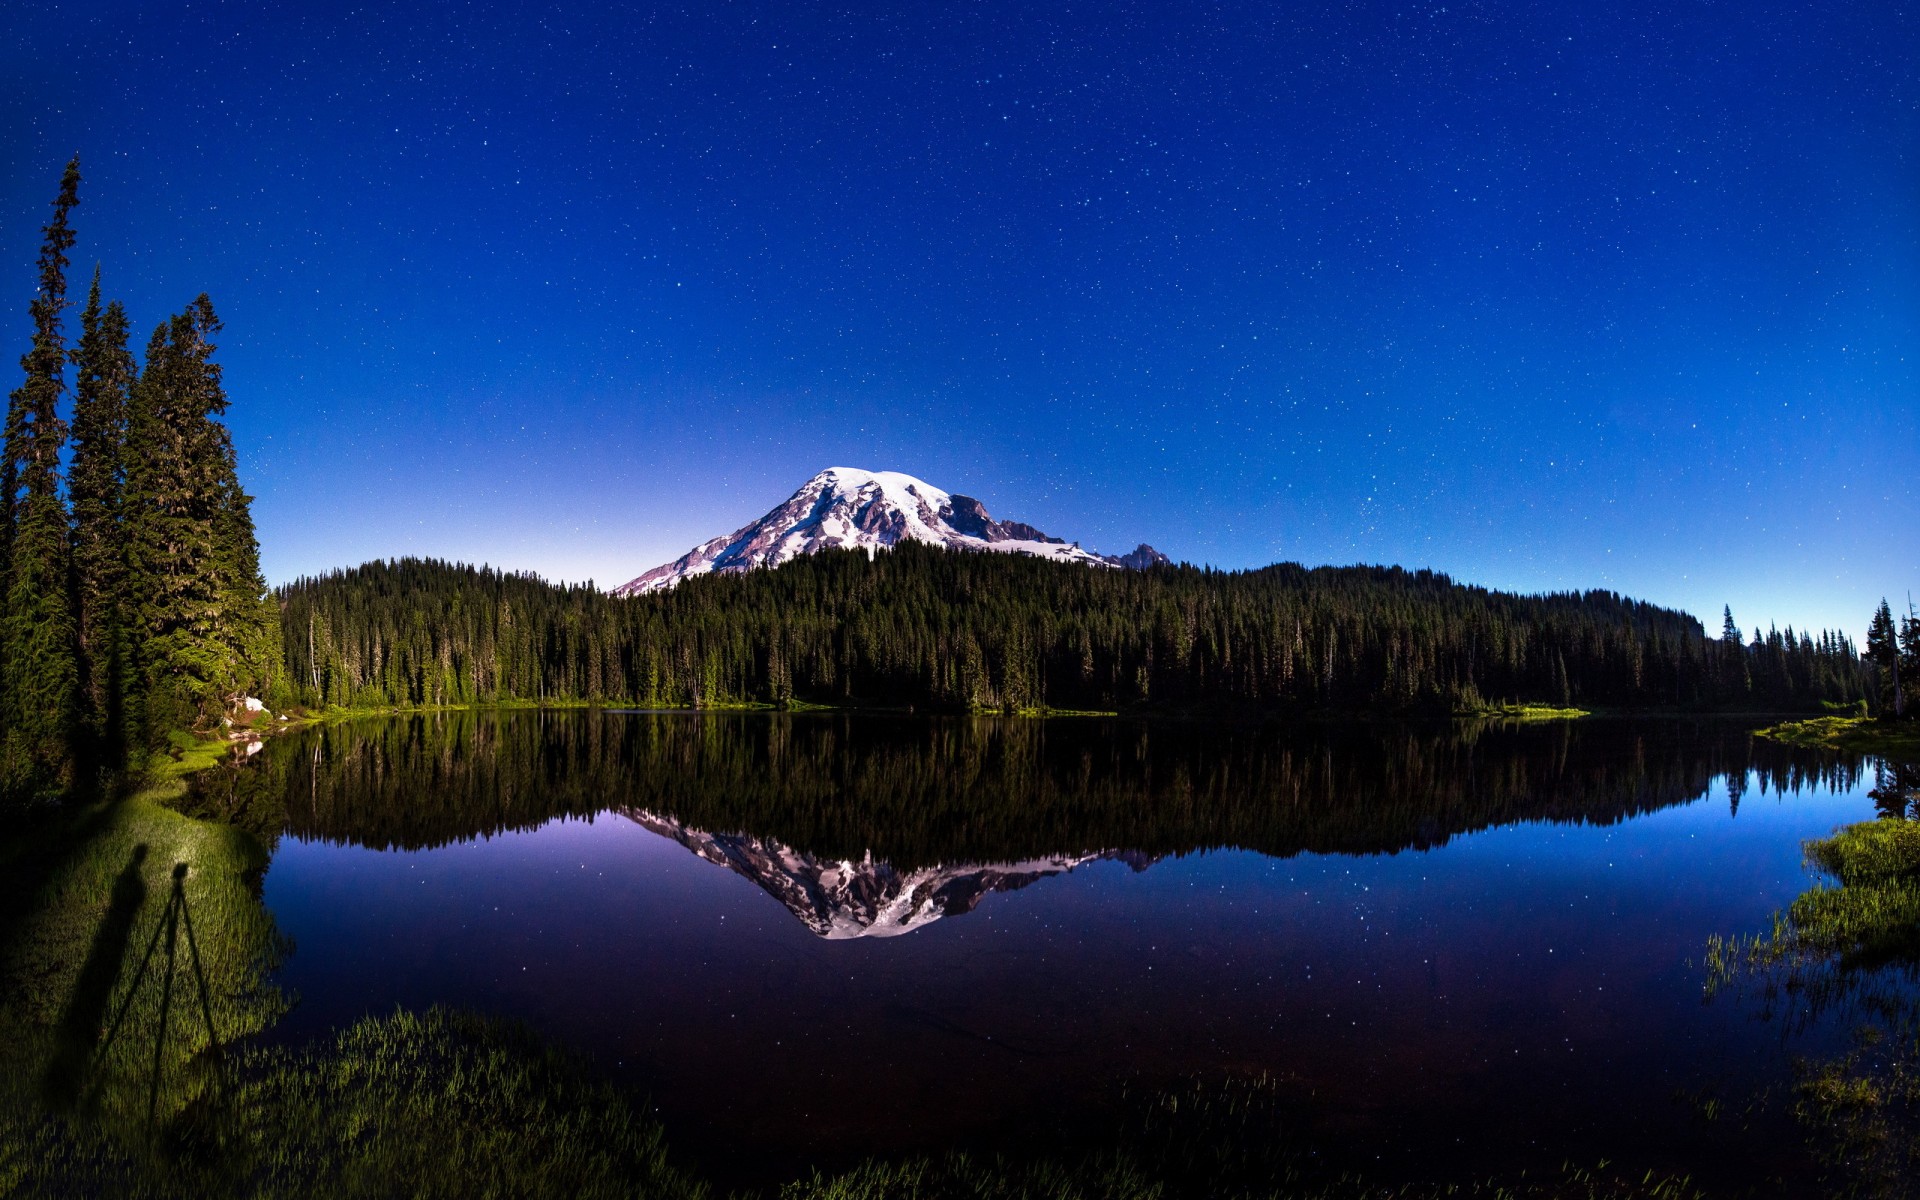 lake, Mountain, Summer, Nature, Landscape, Reflection, Trees, Forest, Stars, Sky, Night, Shore, Snow Wallpaper